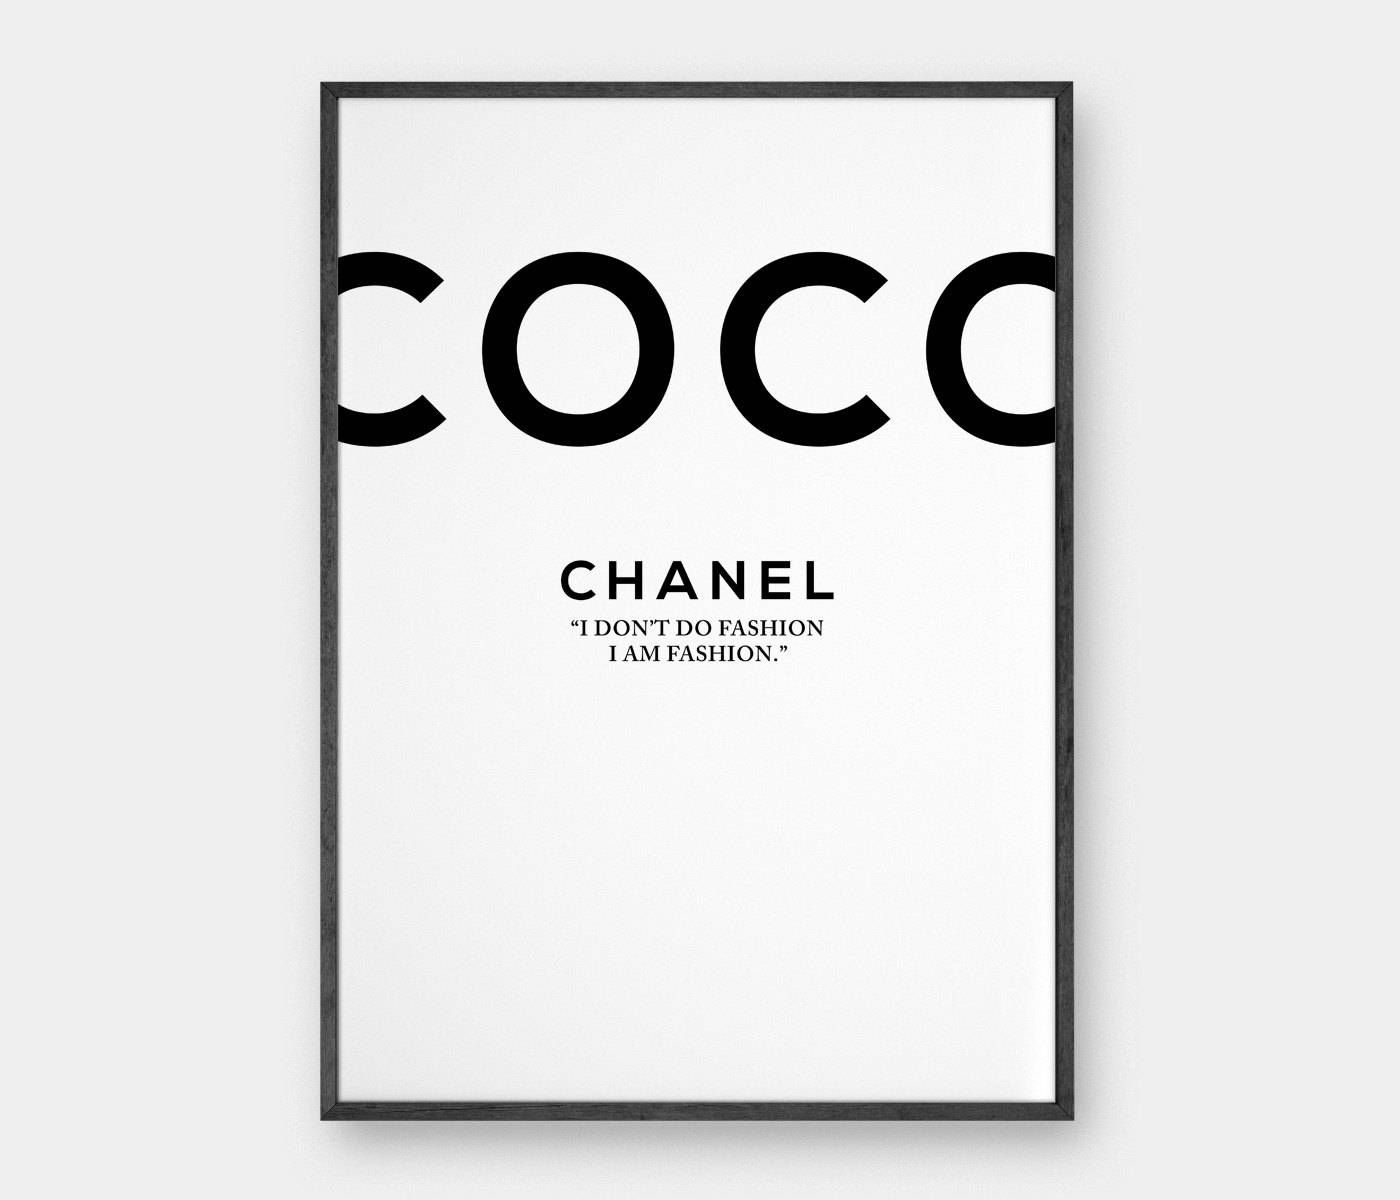 Coco Wall Art Chanel Prints Chanel Quote Coco Prints Pertaining To 2018 Coco Chanel Wall Stickers (View 26 of 30)